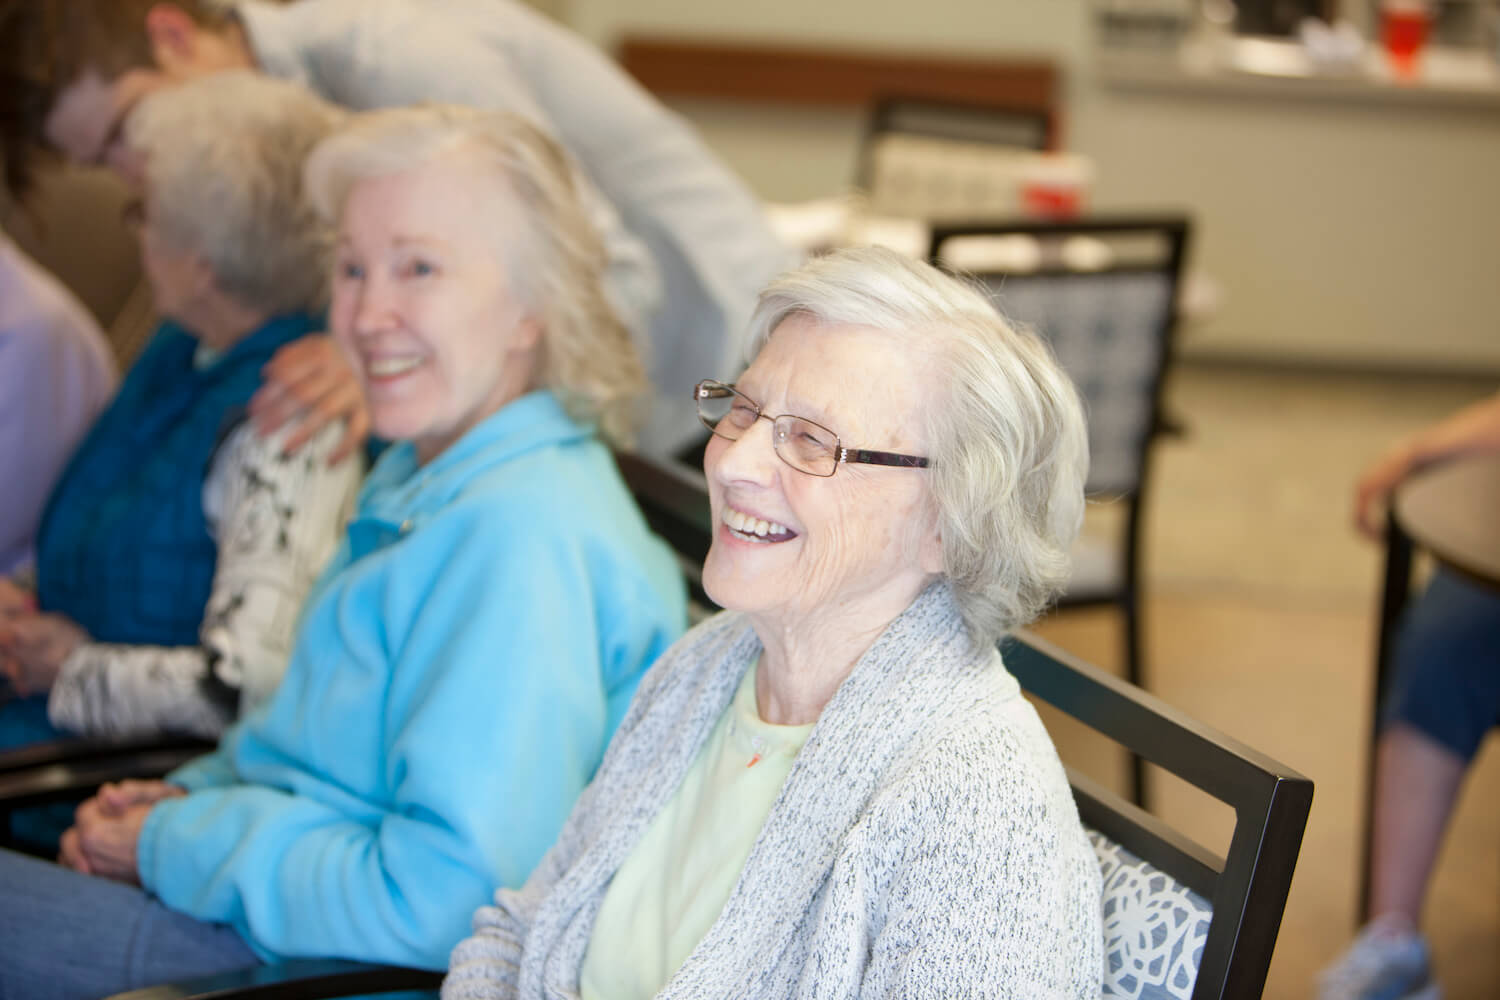 Residents spending time together in a living room